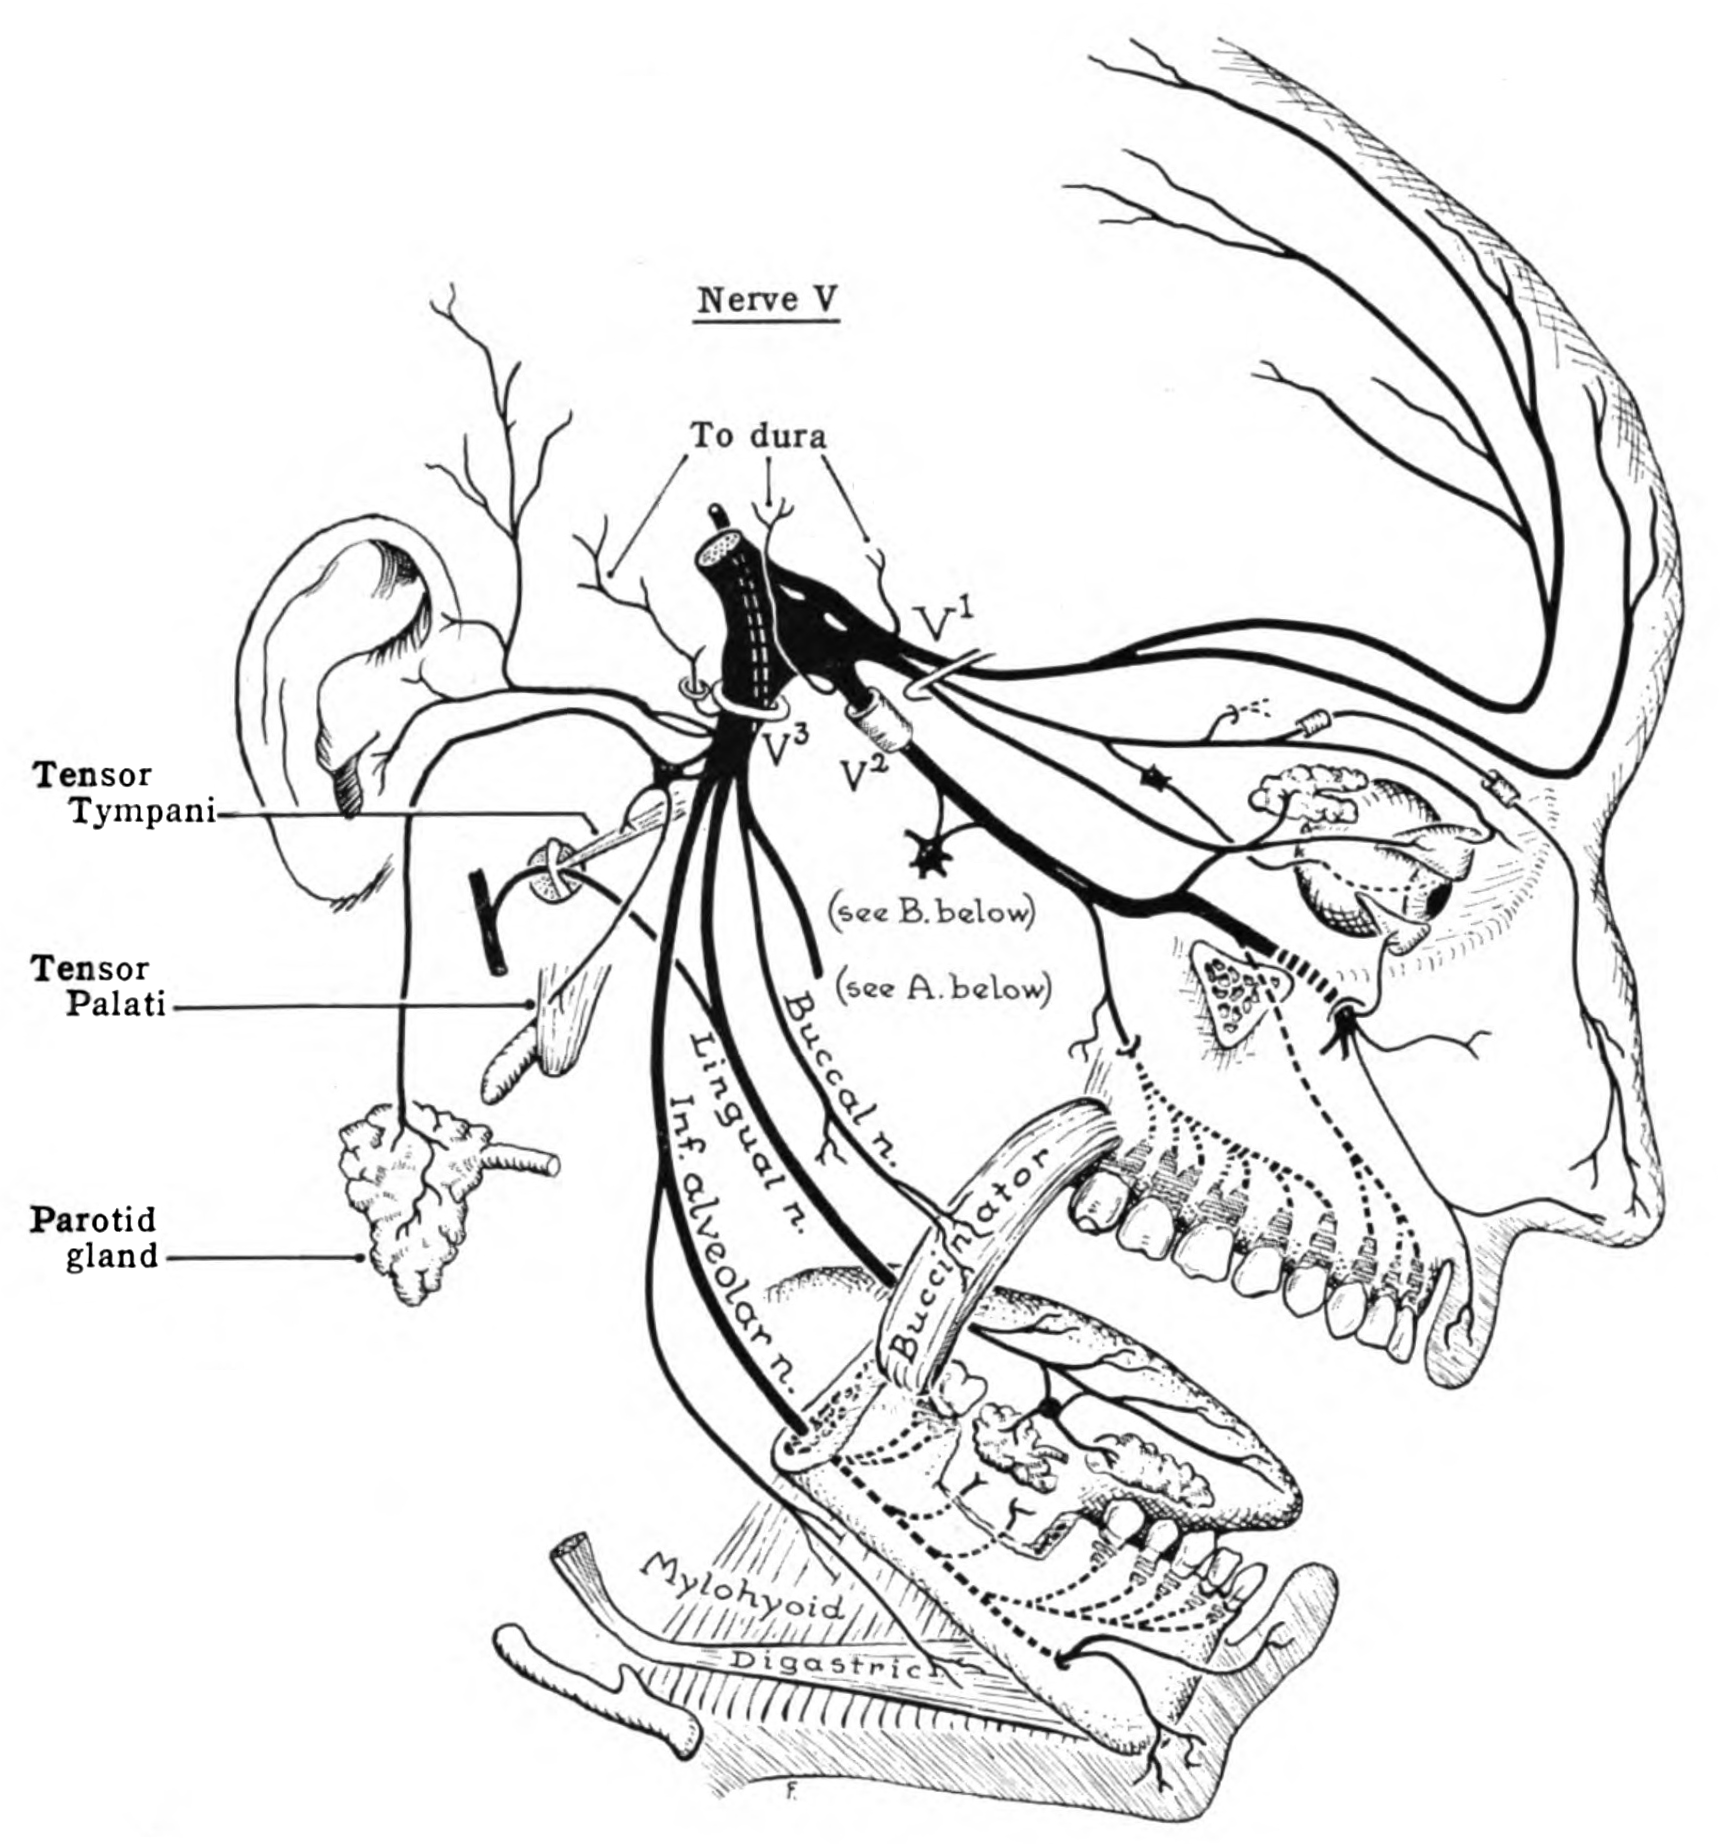 image showing the trigeminal nerve, which starts near the temple and spreads over the face and forehead